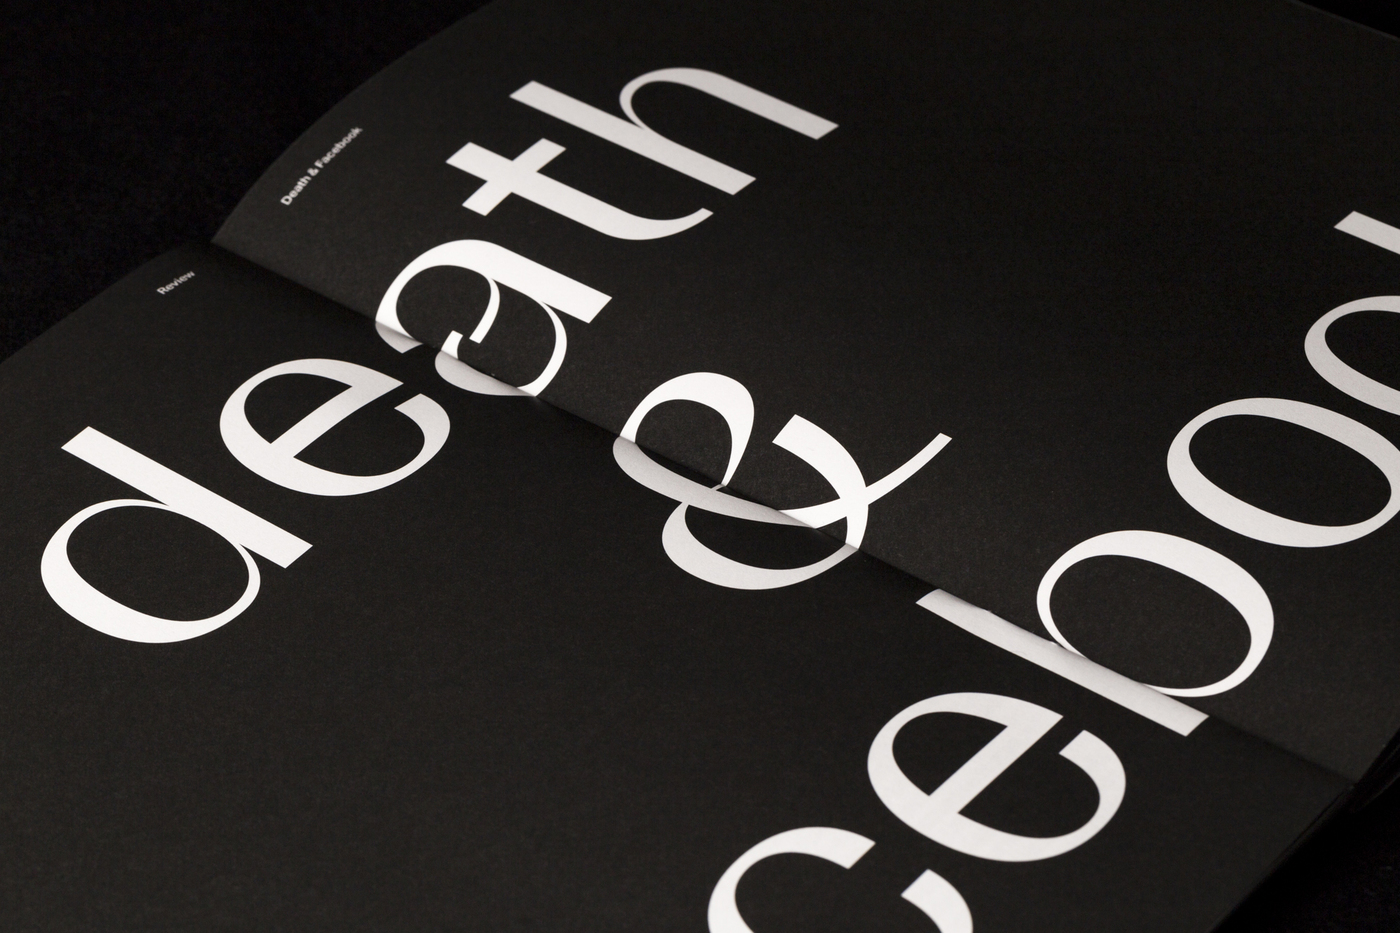 Cellophane, Issue 01, “In Transition” - Fonts In Use